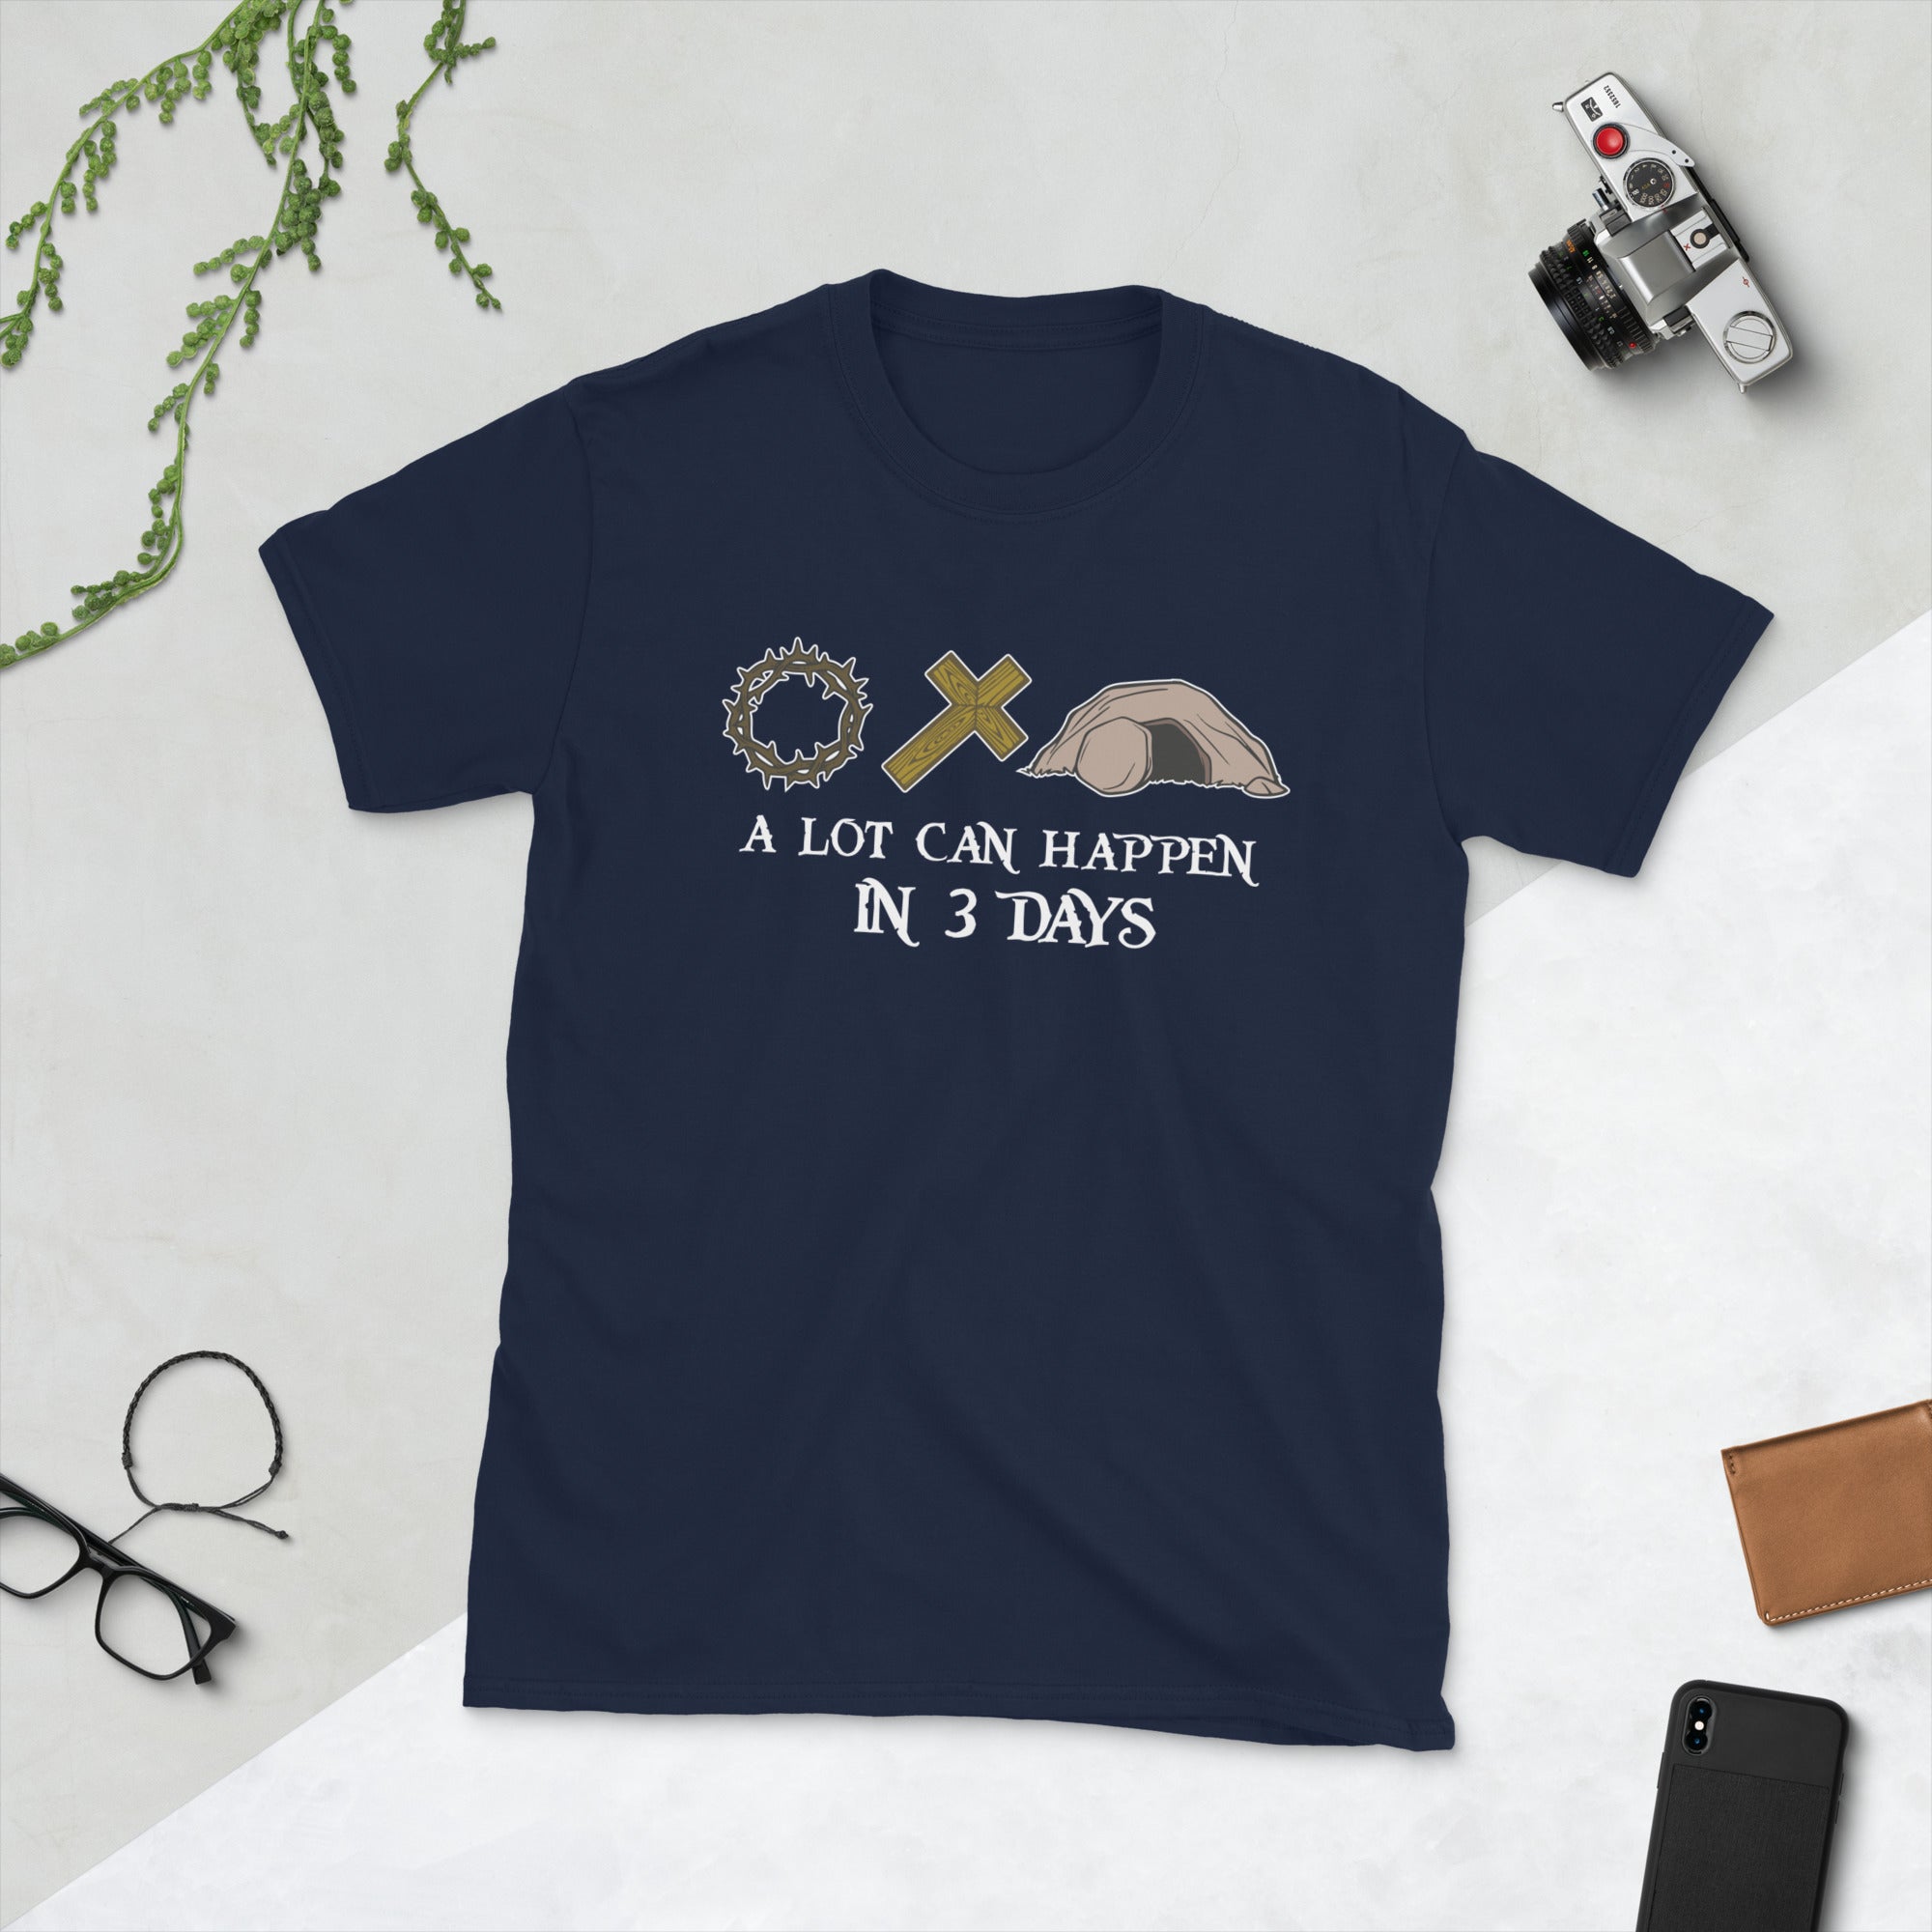 A lot can happen in 3 days Shirt,Christian Easter Shirt,Easter Shirt For Woman,Easter is for Jesus Tee,Funny Easter Shirt,Easter Family Gift